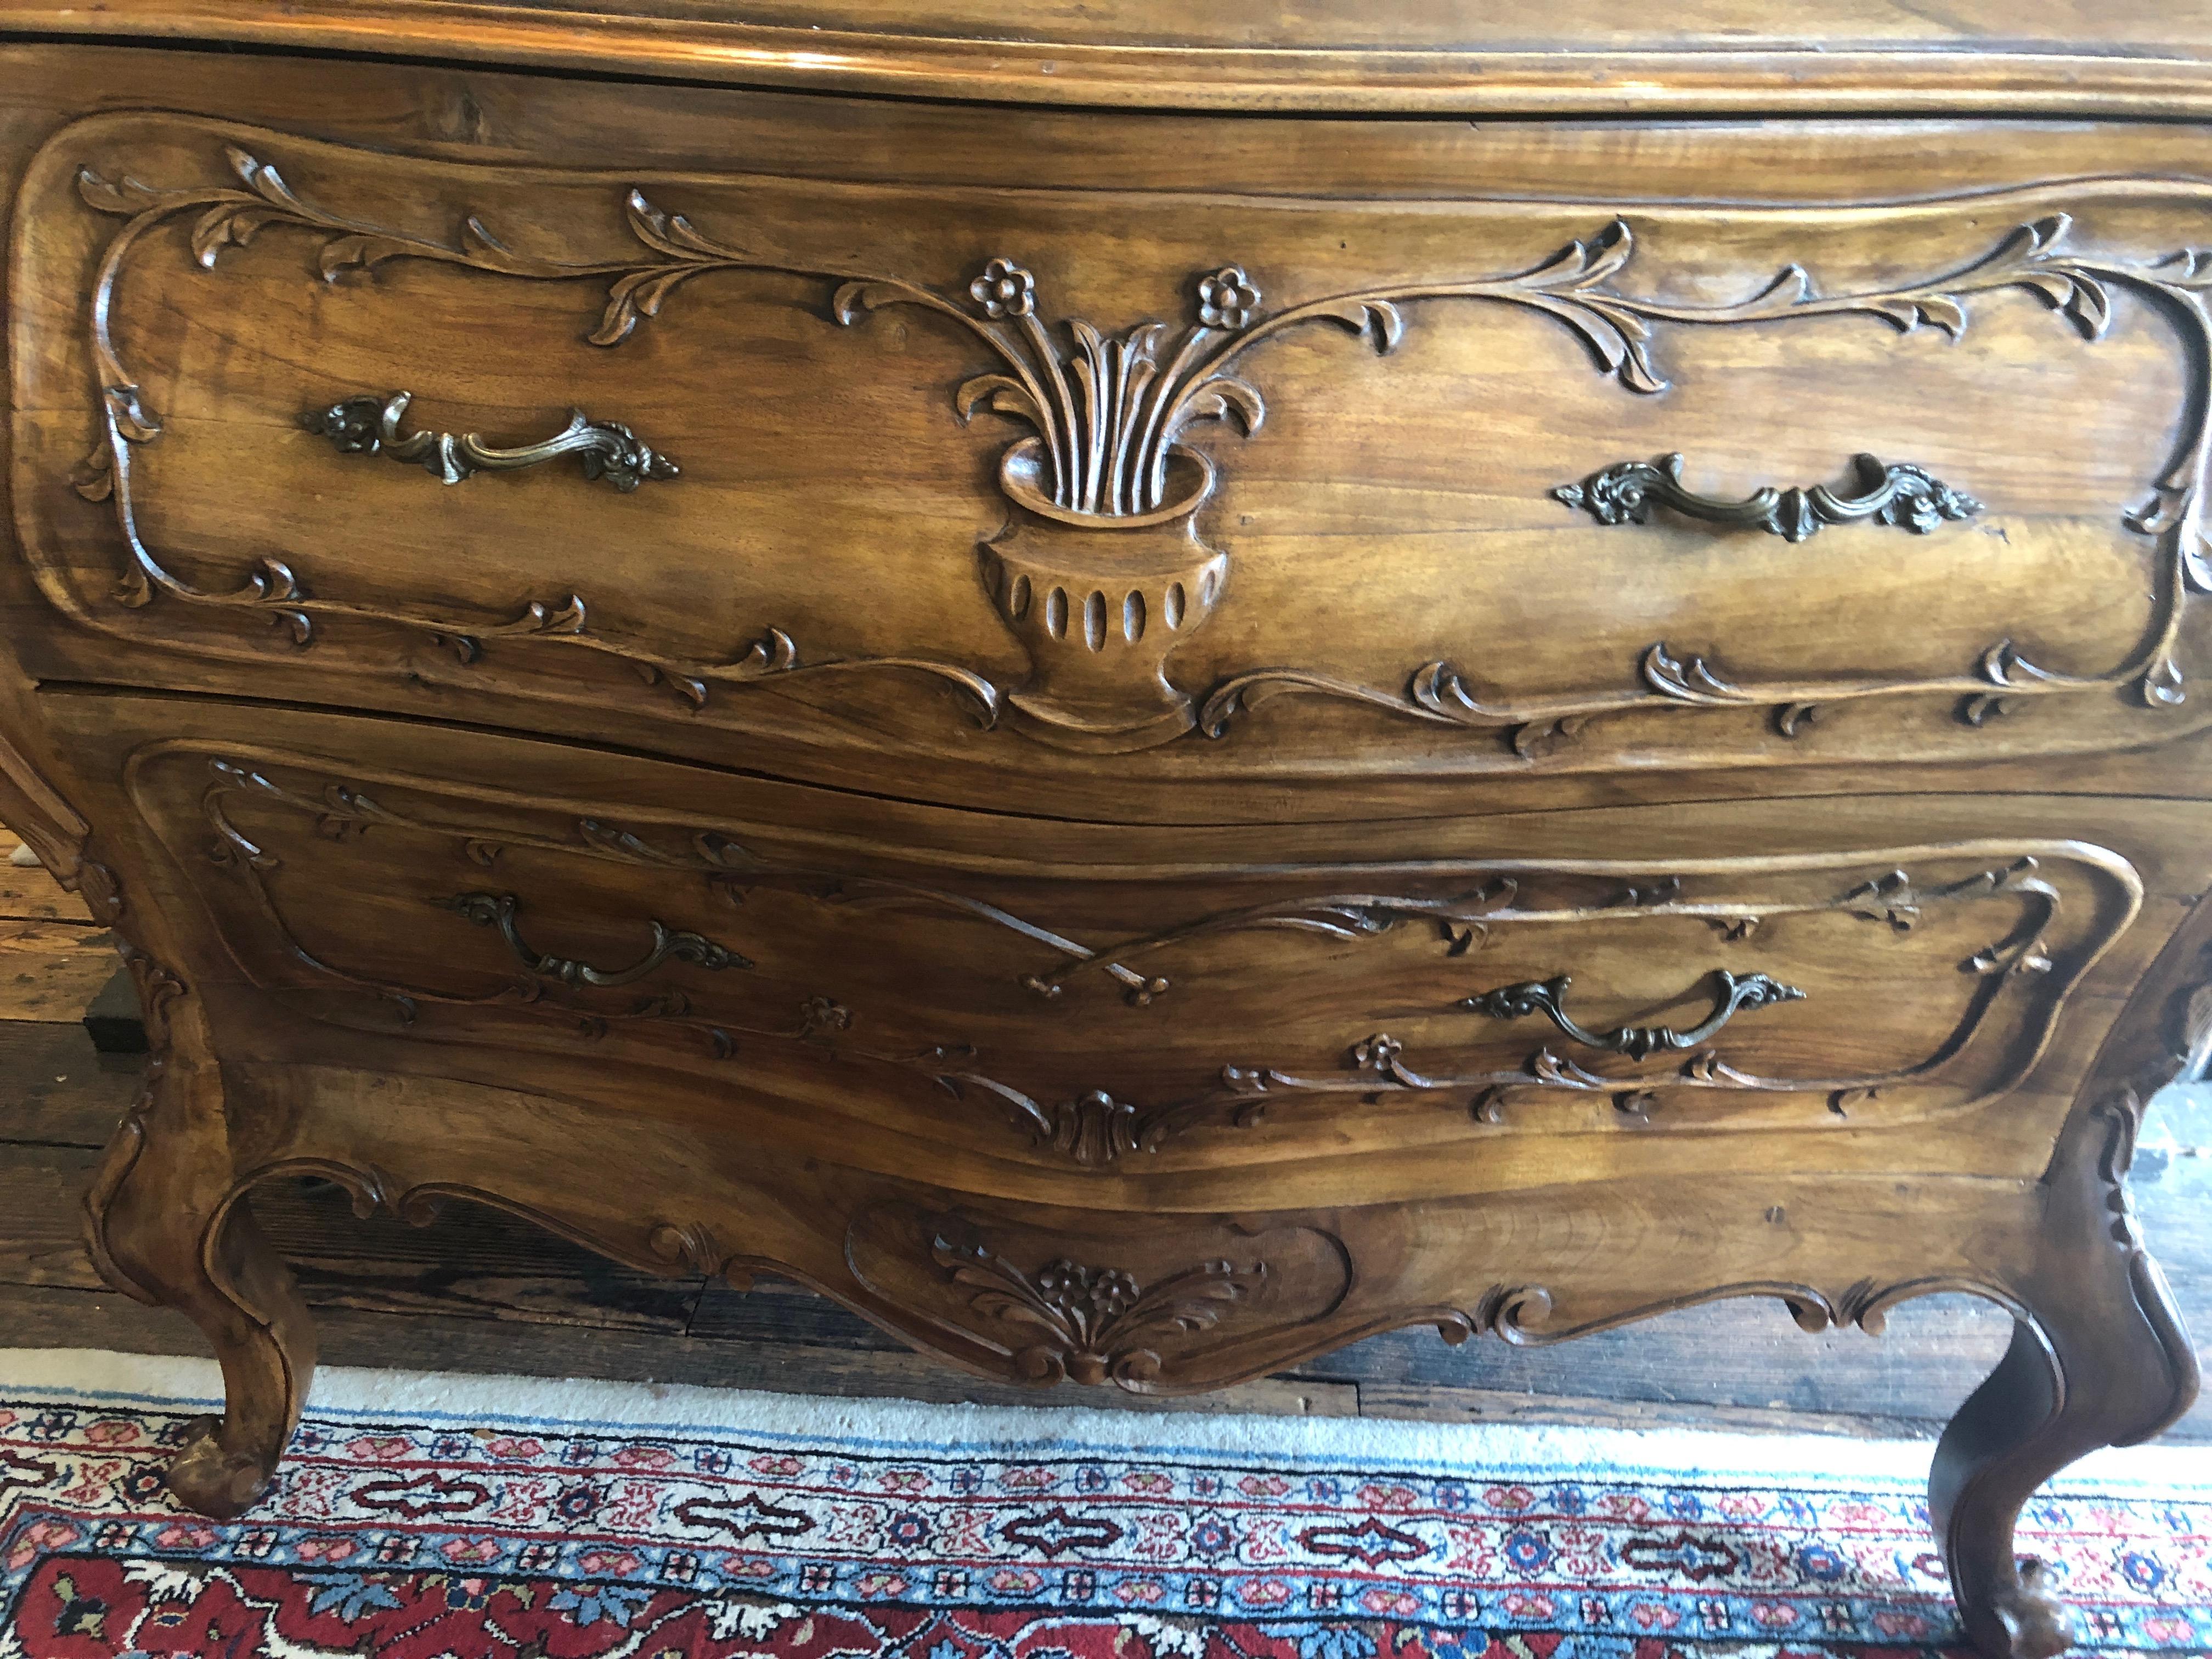 Absolutely beautiful carved wood bombay style two-drawer commode having gorgeous grain, decorations including vase of flowers and acanthus leaves on the cabriole legs, and lovely original brass hardware.